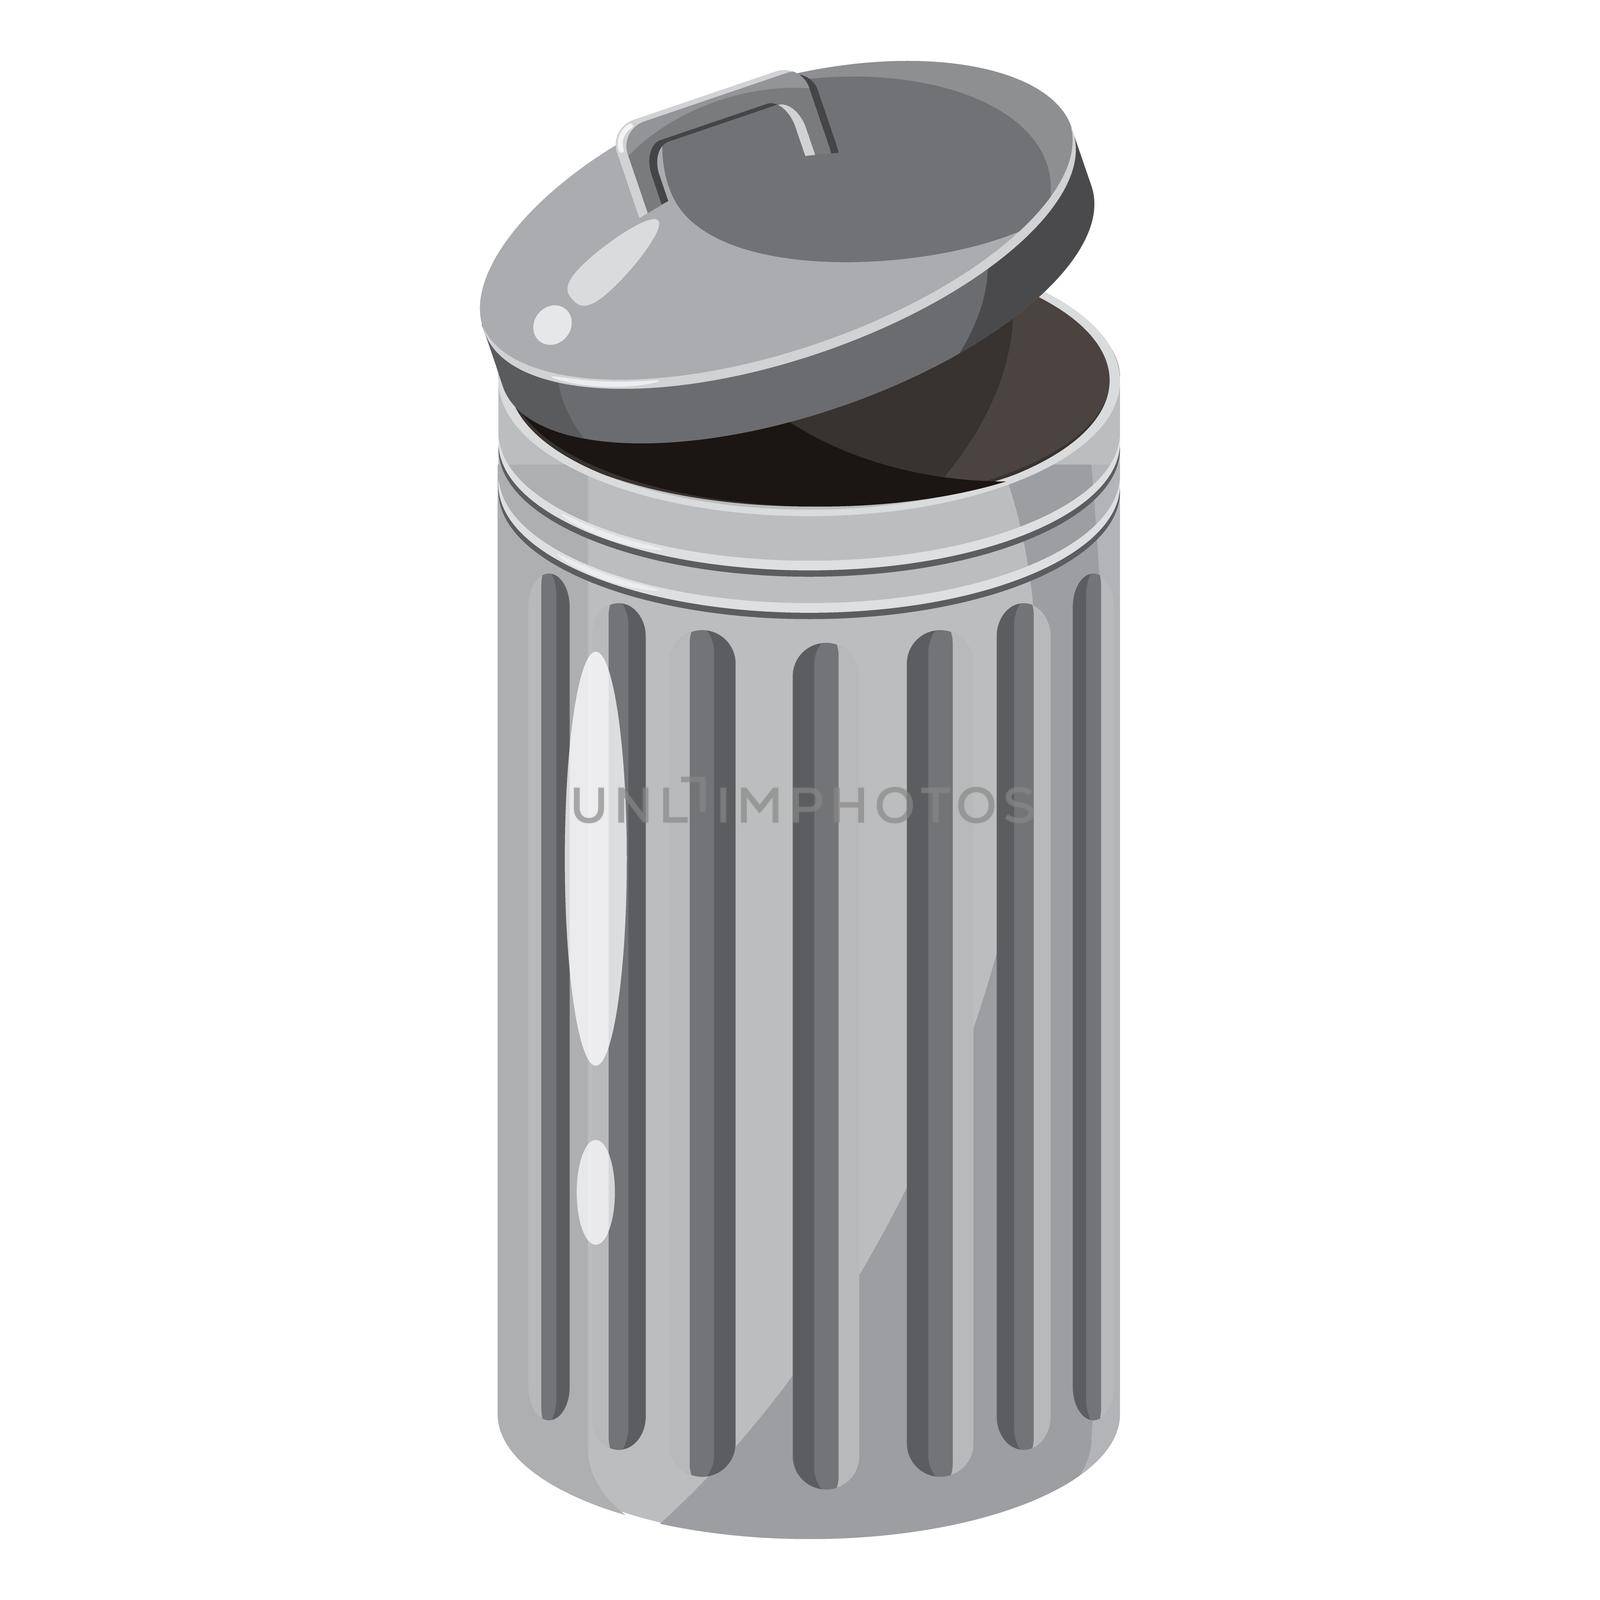 Trash bin icon in cartoon style on a white background